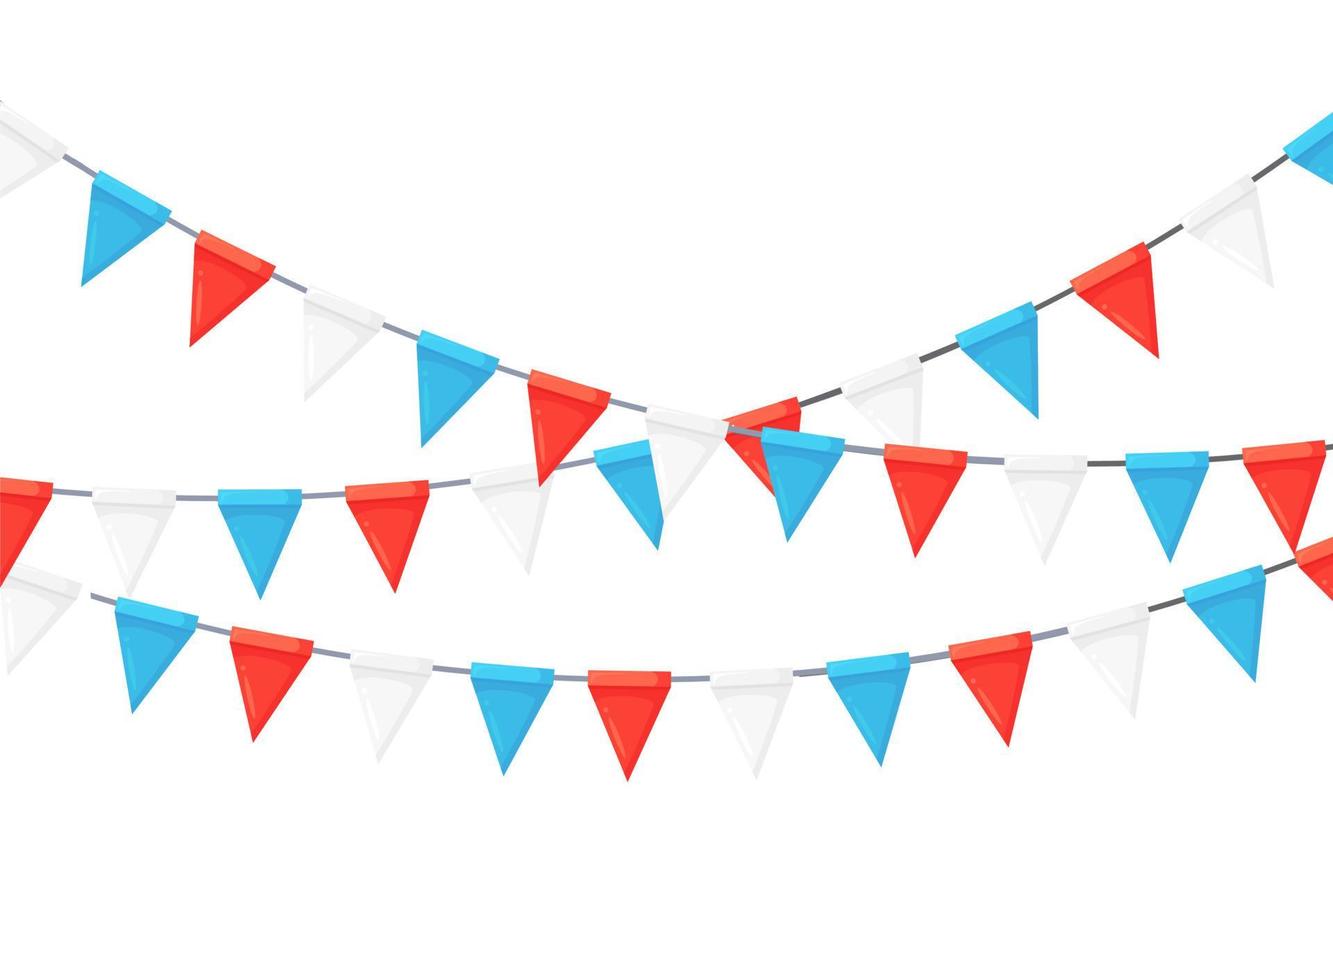 Banner with garland of colour festival flags and ribbons, bunting. Background for celebrate happy birthday party, carnaval, fair. Vector flat design